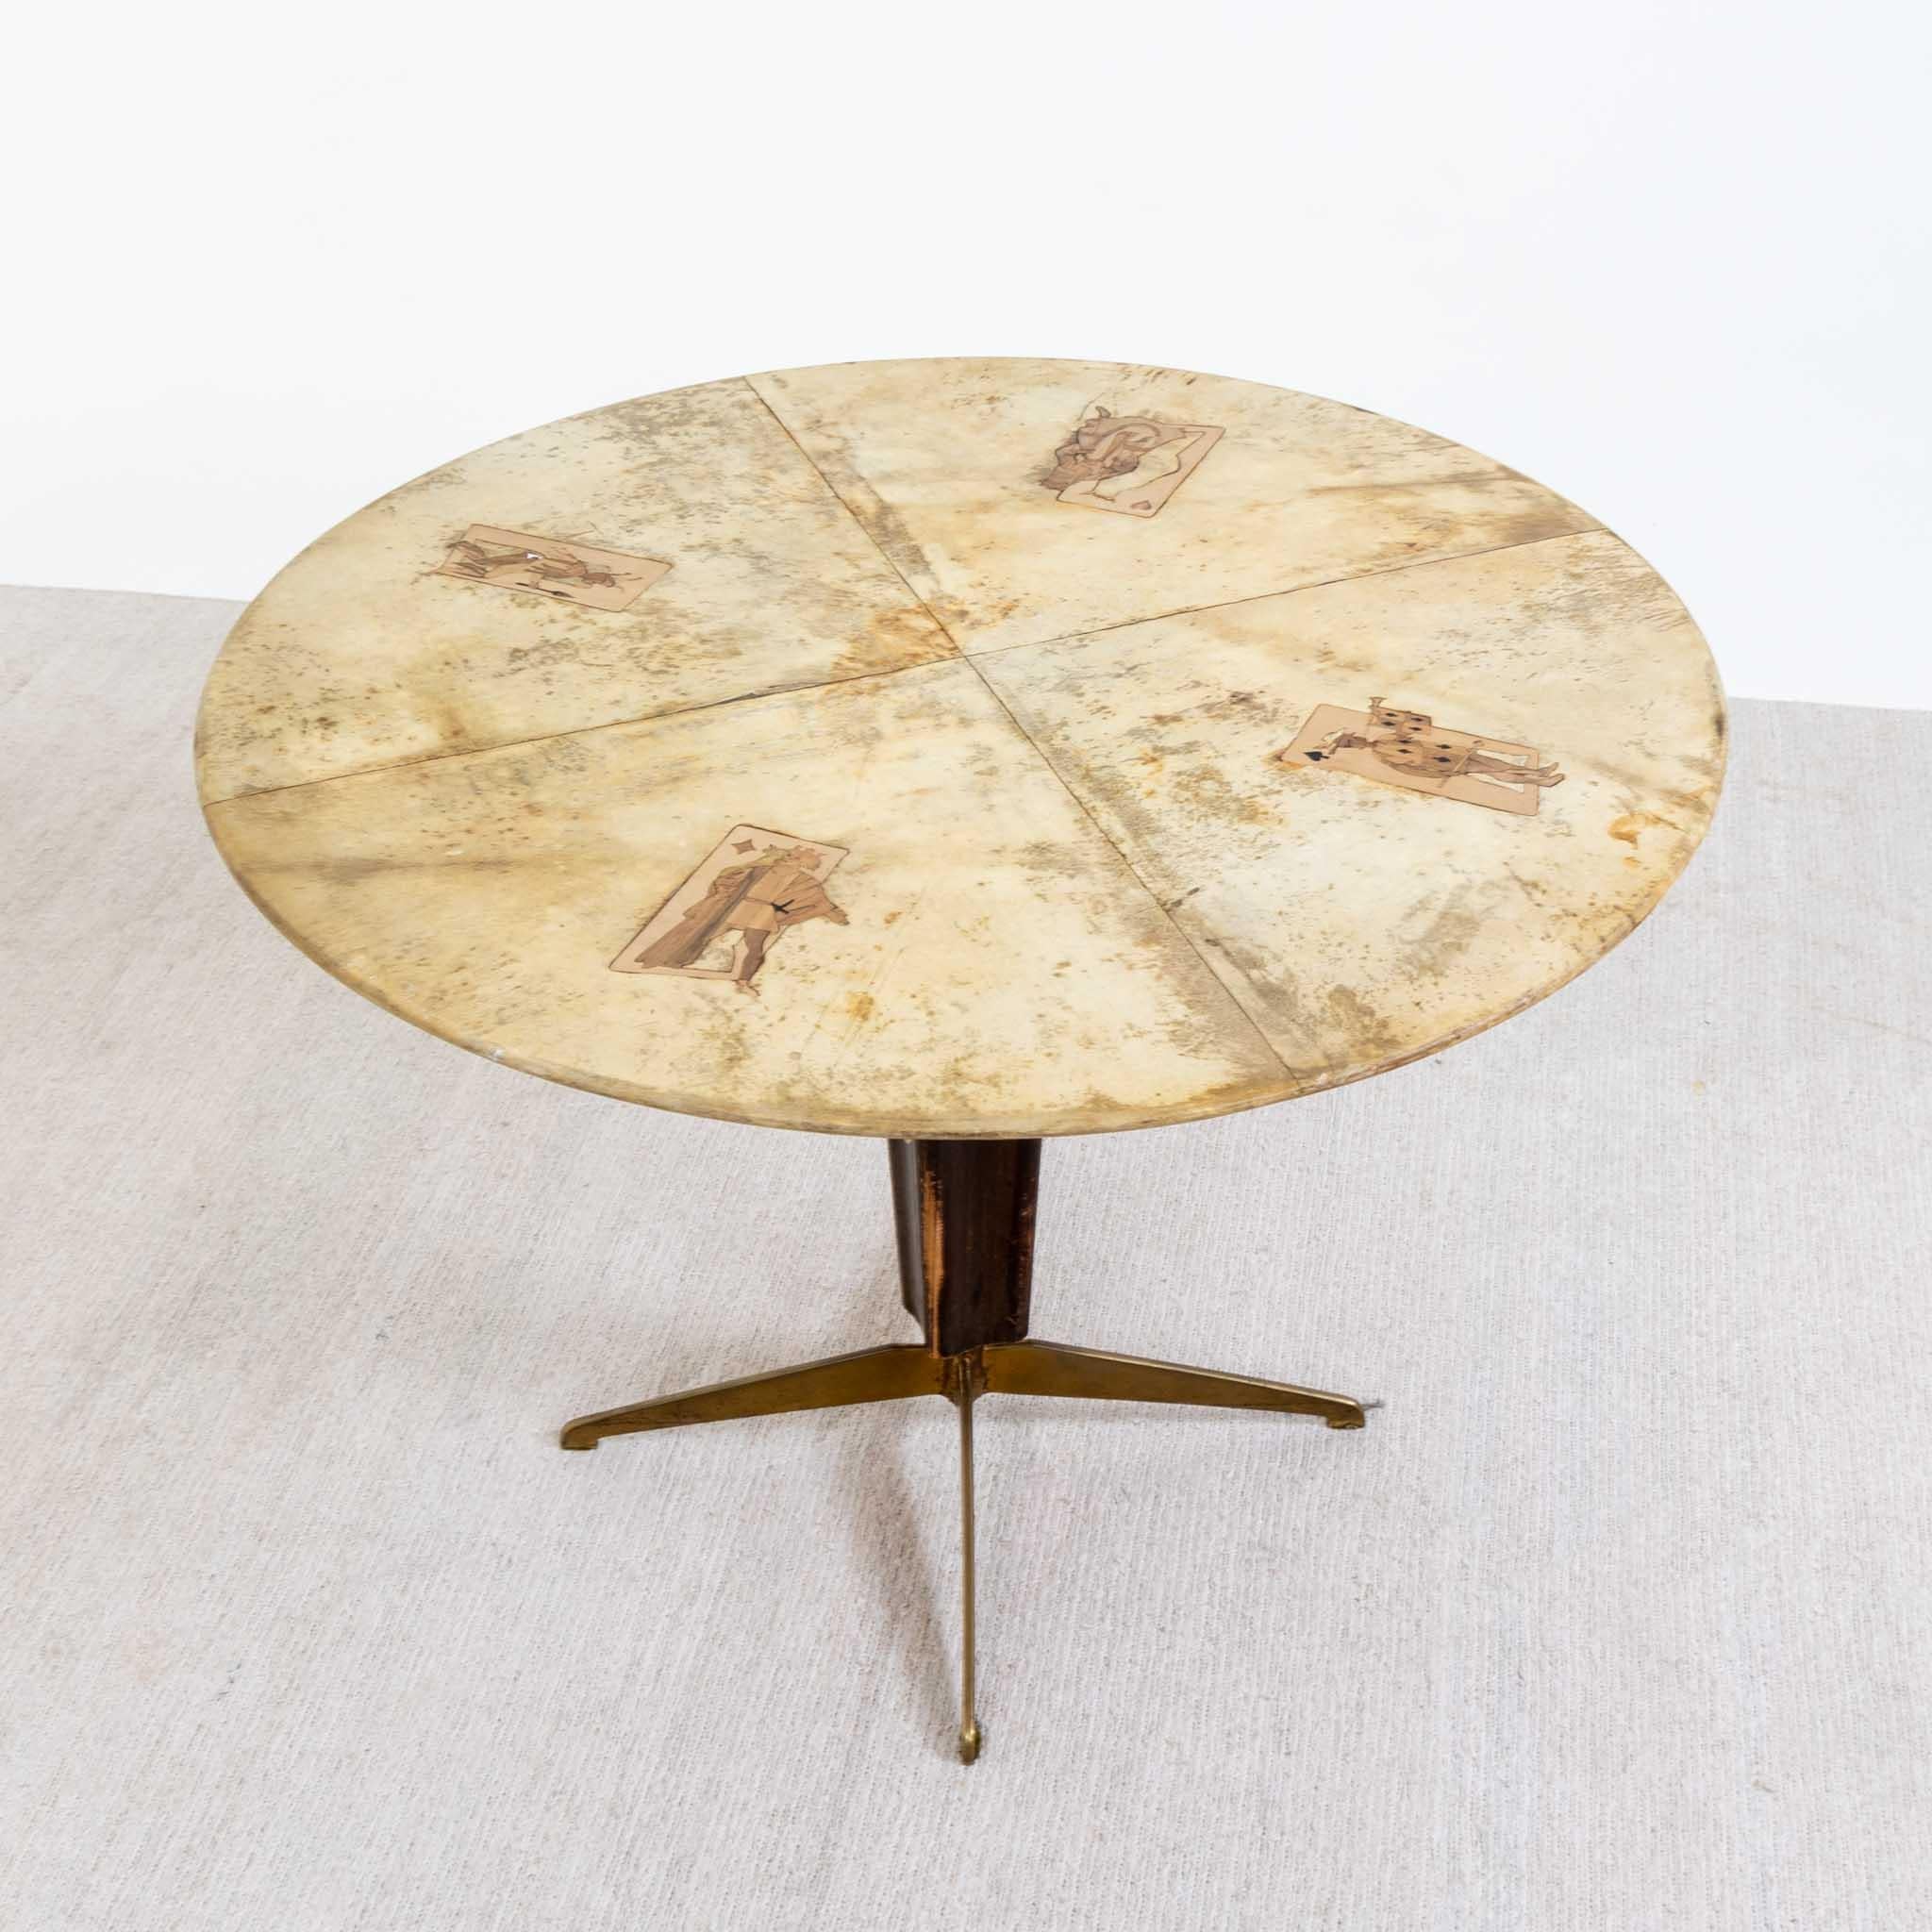 Parchment game table with wood marquetry inlay in a playing card motif. 
Brass base with mahogany wood support.